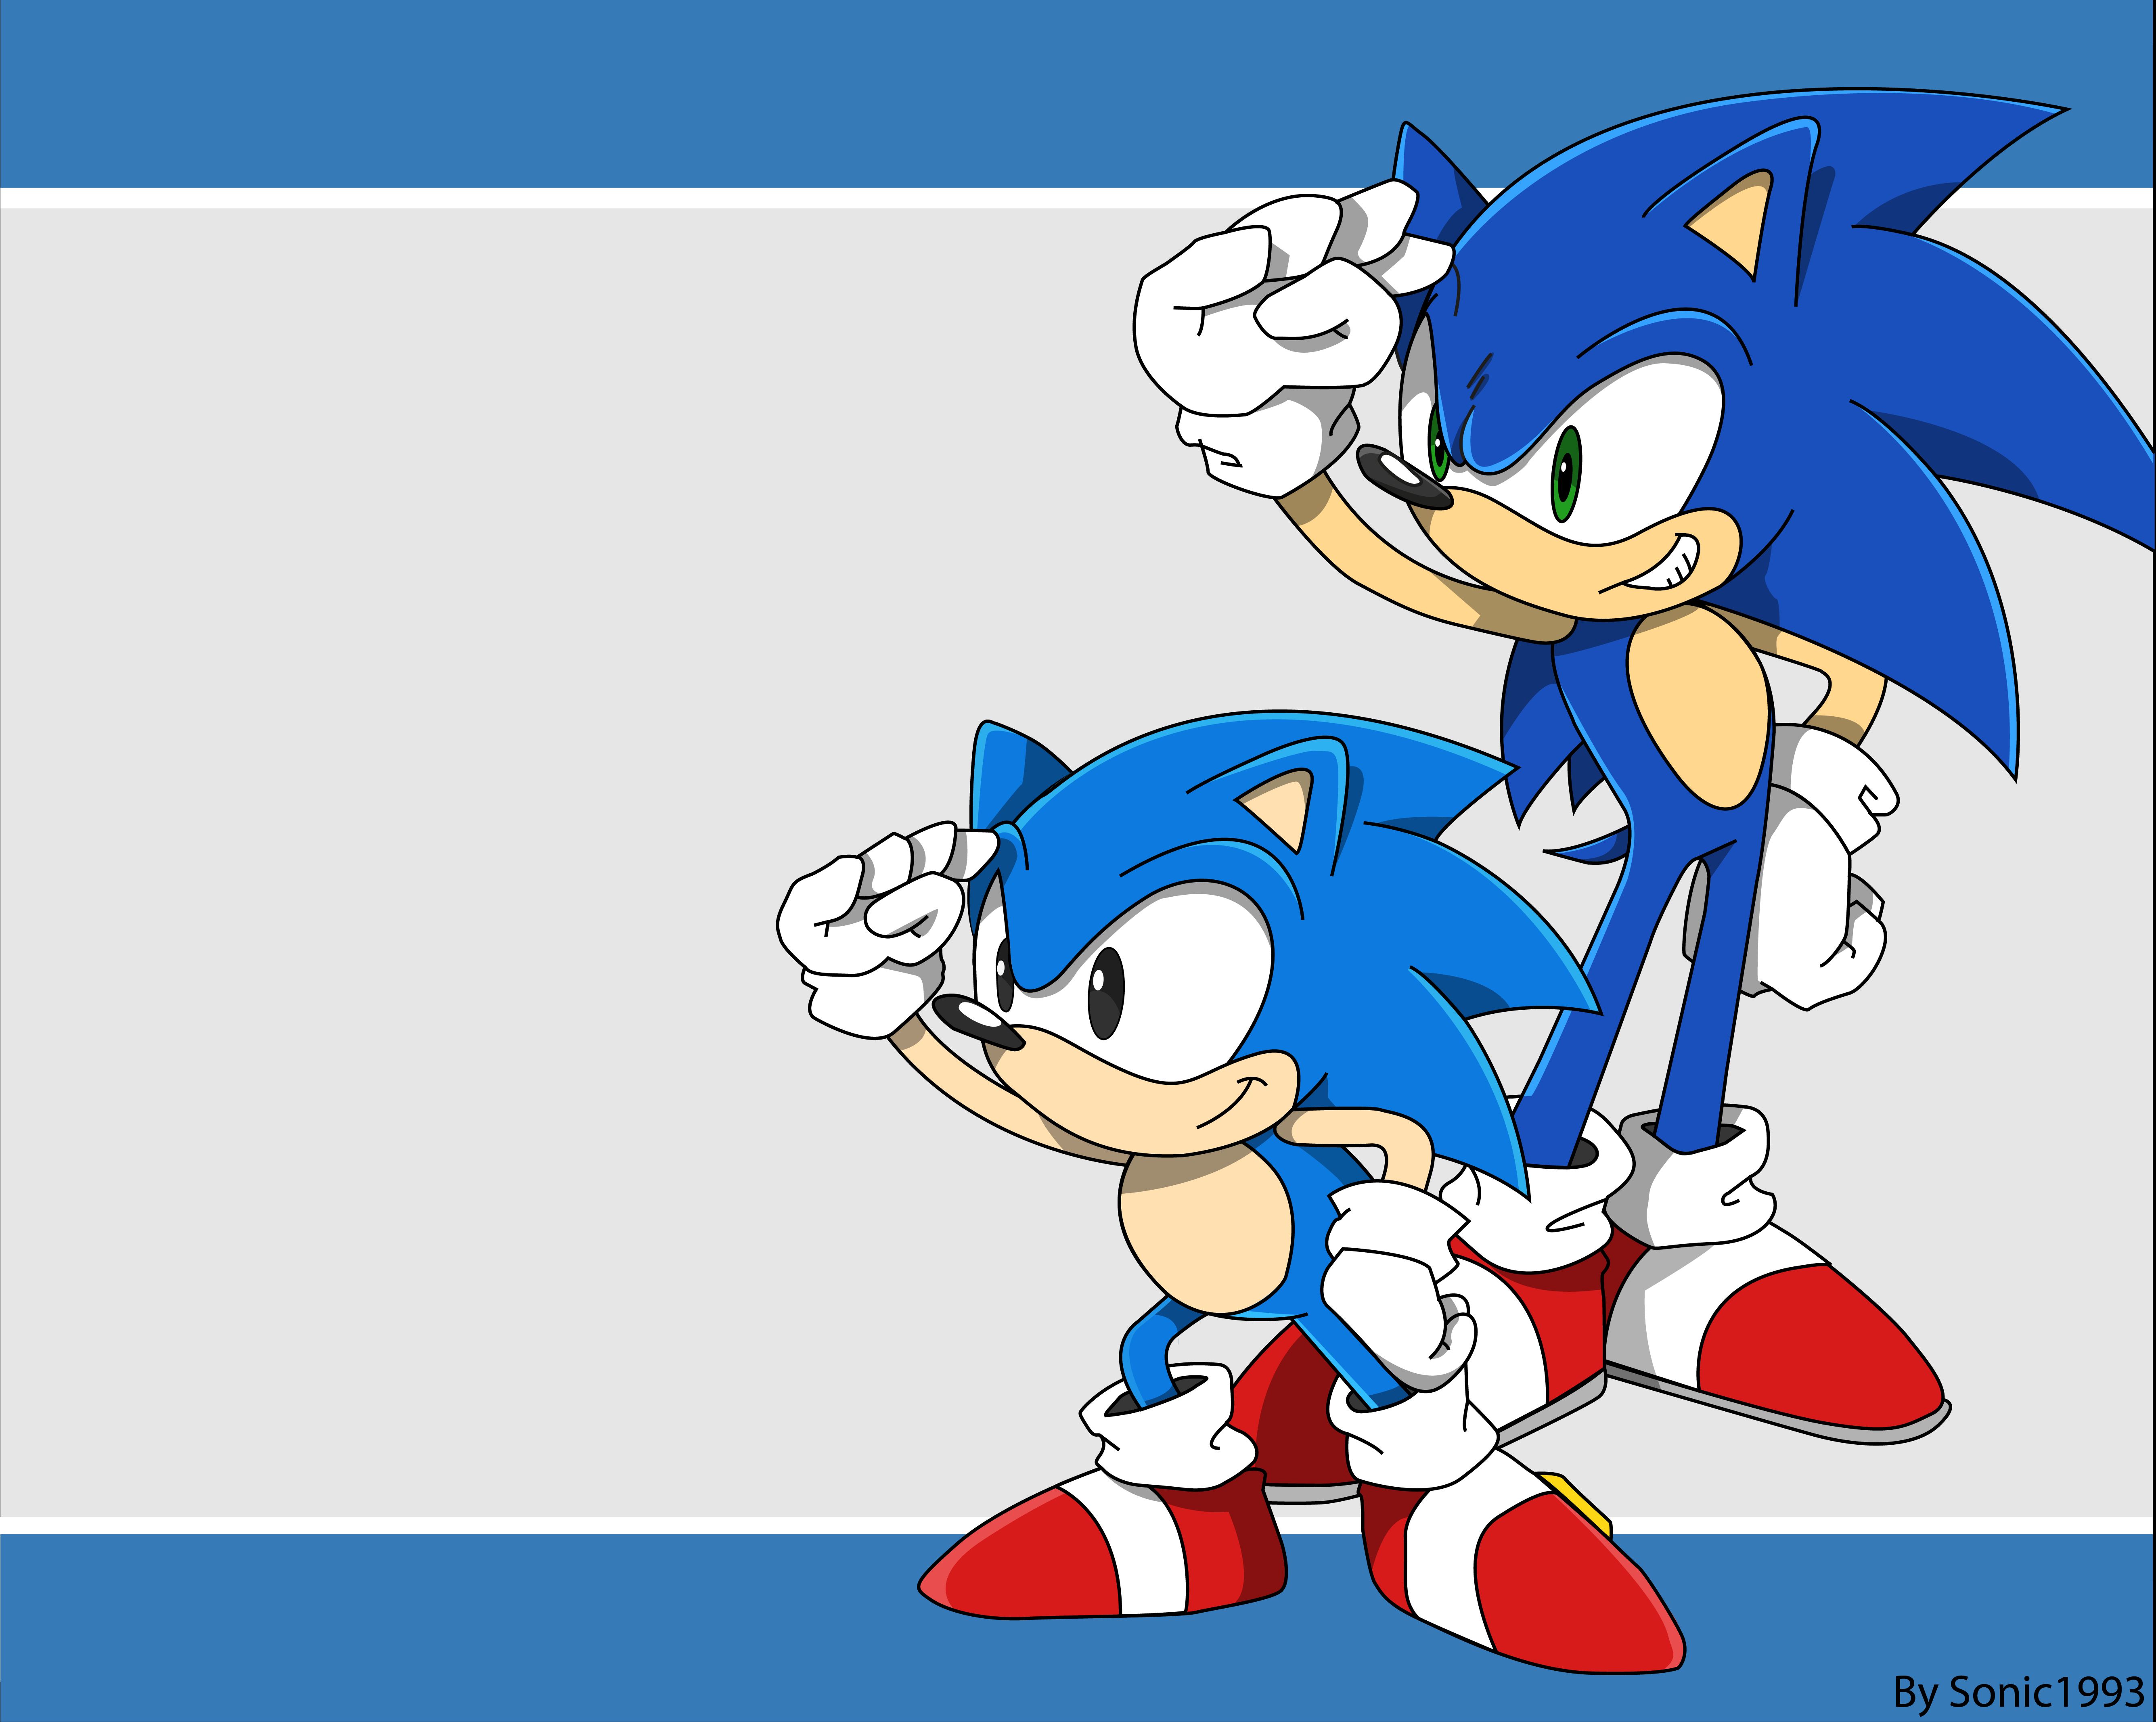 Classic Sonic The Hedgehog And Friends Wallpaper by SonicTheHedgehogBG on  DeviantArt  Sonic the hedgehog Classic sonic Sonic